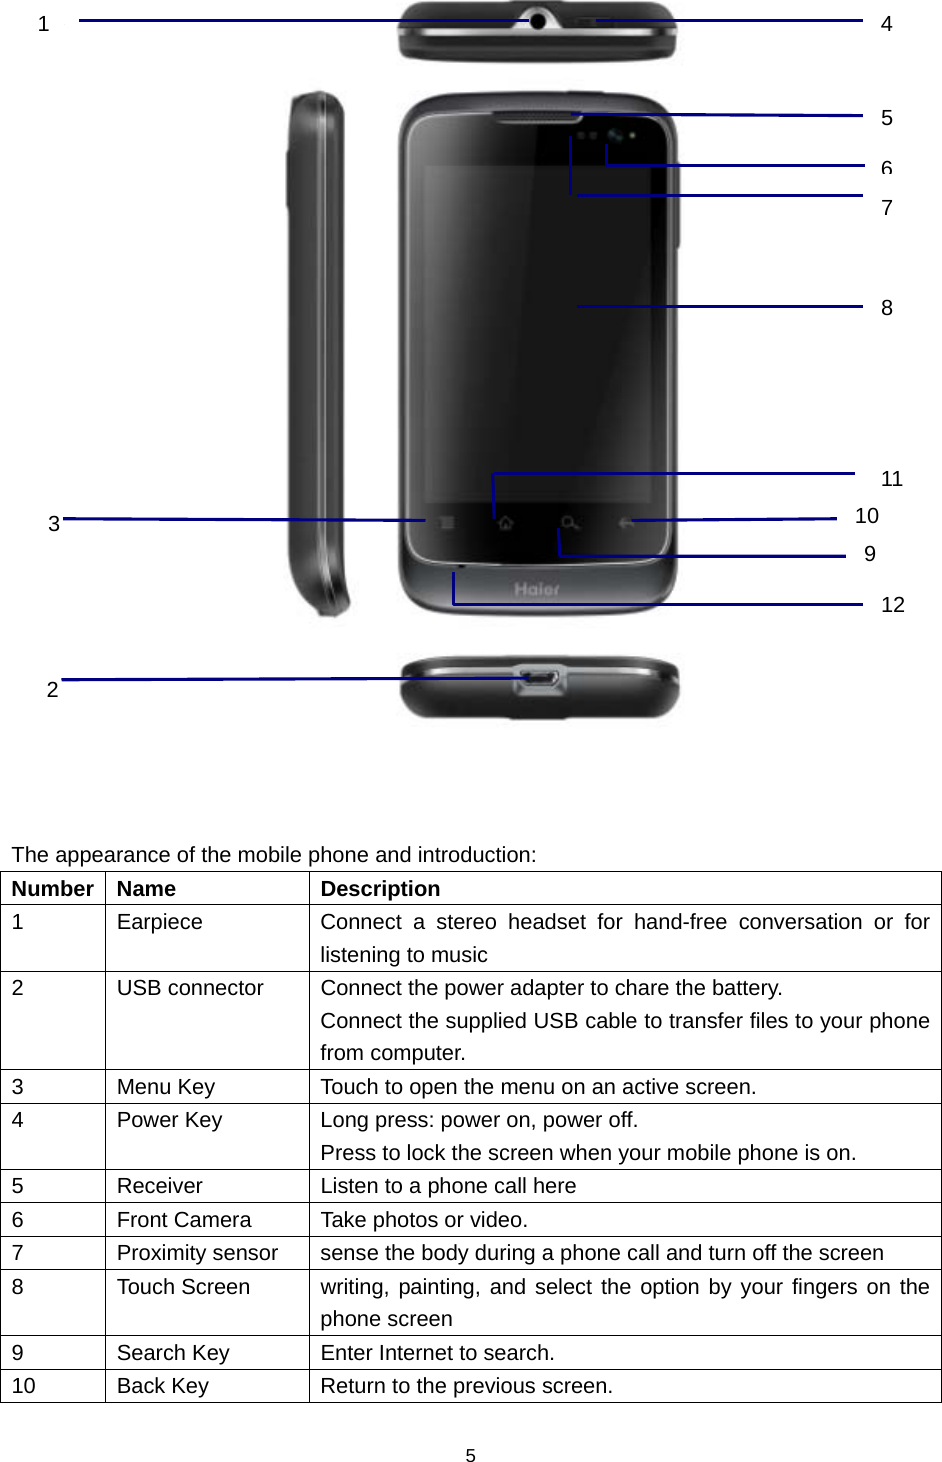 5     The appearance of the mobile phone and introduction: Number Name  Description 1  Earpiece  Connect a stereo headset for hand-free conversation or for listening to music 2  USB connector  Connect the power adapter to chare the battery. Connect the supplied USB cable to transfer files to your phone from computer. 3  Menu Key  Touch to open the menu on an active screen. 4  Power Key  Long press: power on, power off. Press to lock the screen when your mobile phone is on. 5  Receiver  Listen to a phone call here 6  Front Camera  Take photos or video. 7 Proximity sensor sense the body during a phone call and turn off the screen 8  Touch Screen  writing, painting, and select the option by your fingers on the phone screen 9  Search Key  Enter Internet to search. 10  Back Key  Return to the previous screen. 33 2 4 65 78910111231 